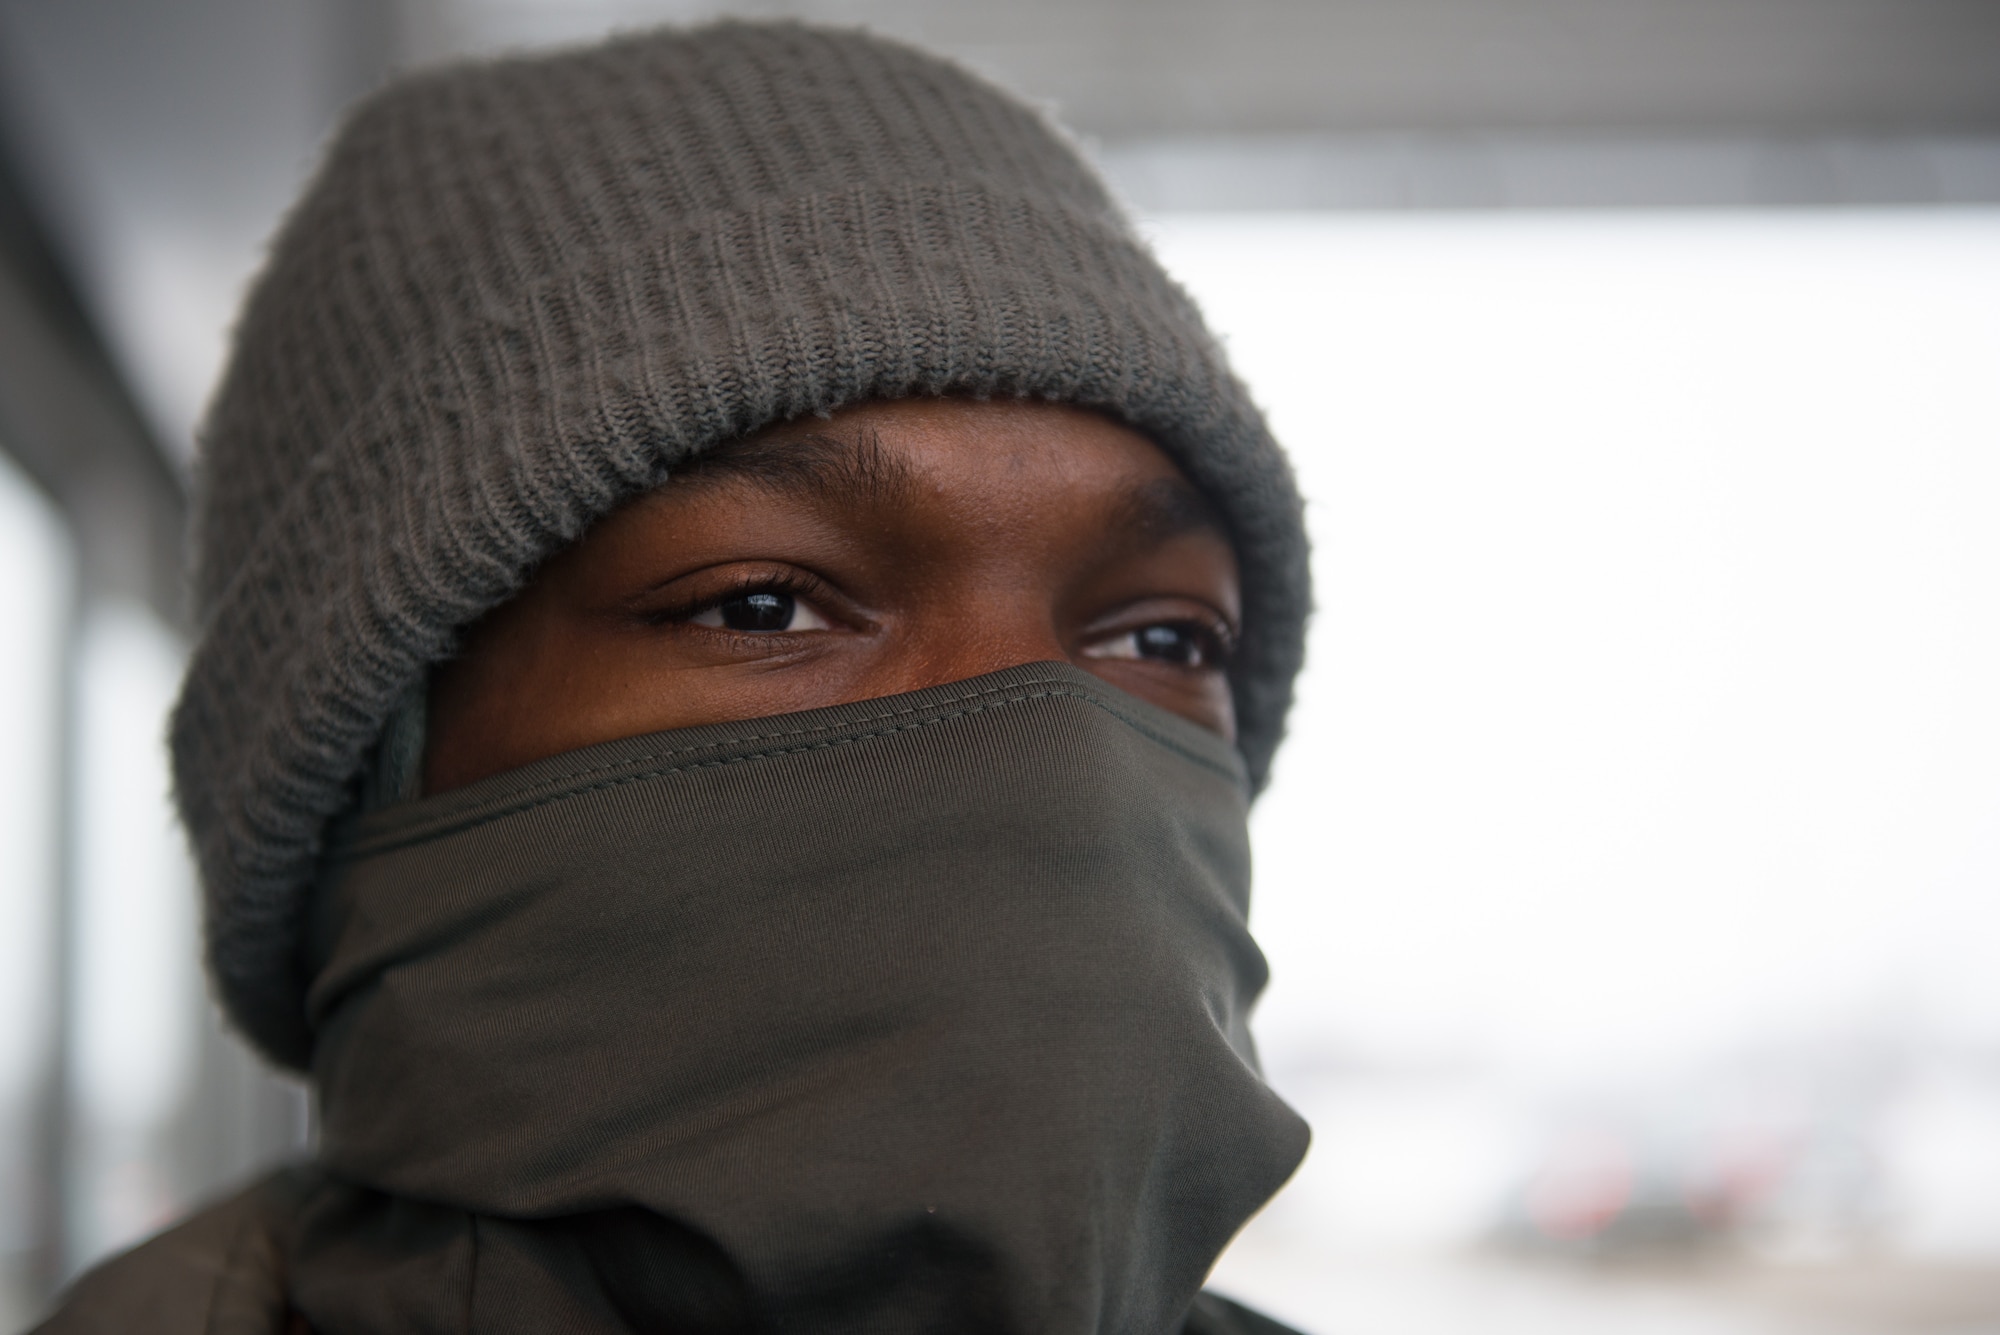 Airman 1st Class Jesse Cooper, 55th Security Force Squadron, stands guard at the U.S. Strategic Command gate March 7, 2019, on Offutt Air Force Base. He is one of nearly a dozen guards working the gate in subfreezing temperatures. (U.S. Air Force photo by Tech. Sgt. Rachelle Blake)